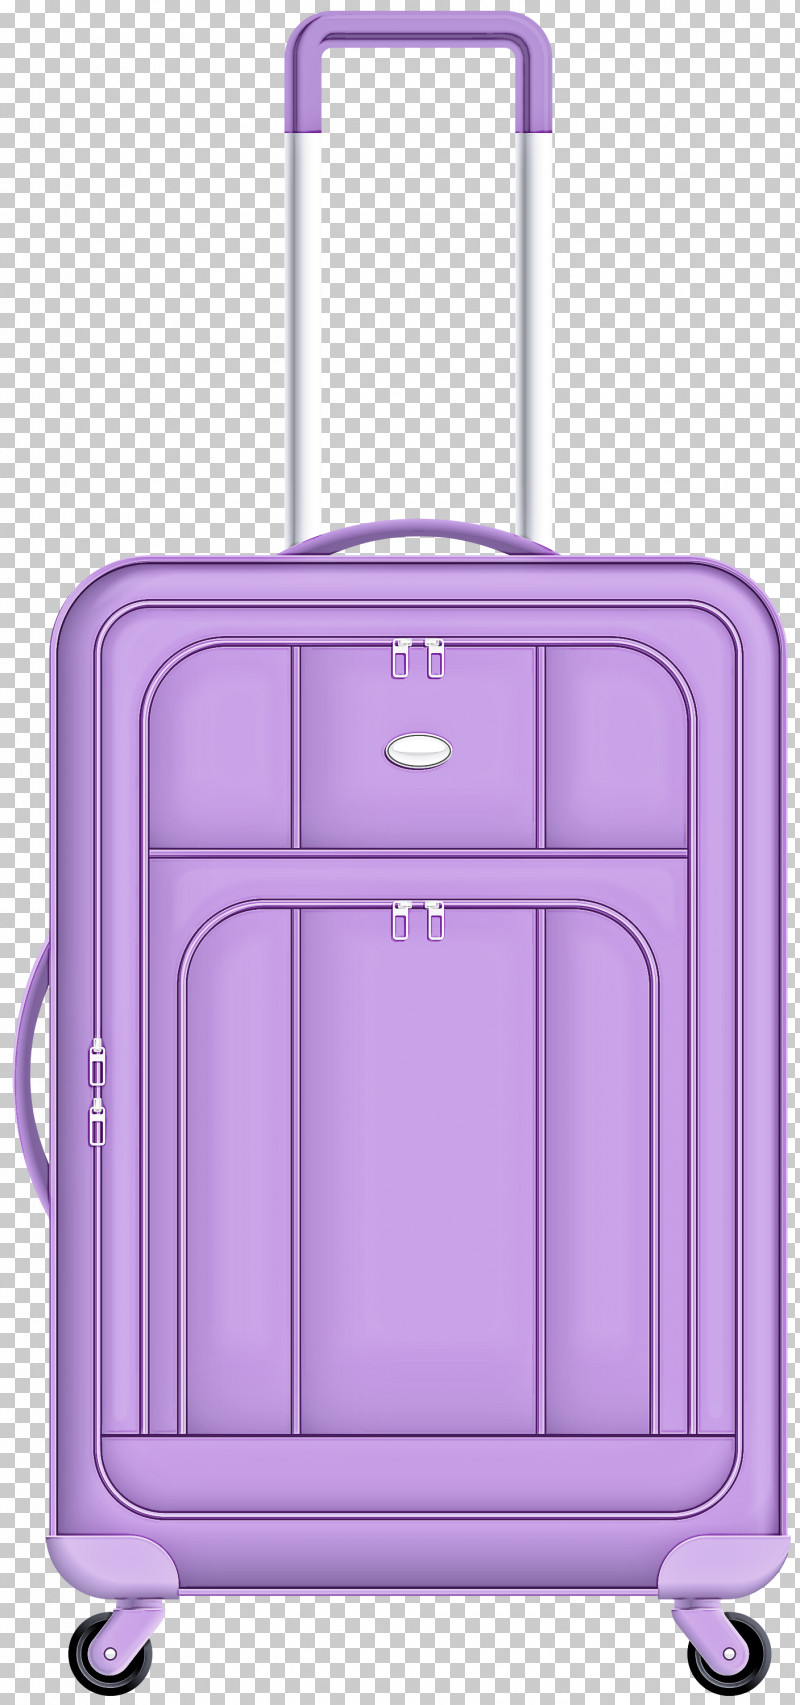 Carry-on Luggage Suitcase Baggage Handbag Hand PNG, Clipart, Baggage, Hand, Handbag, Suitcase Free PNG Download